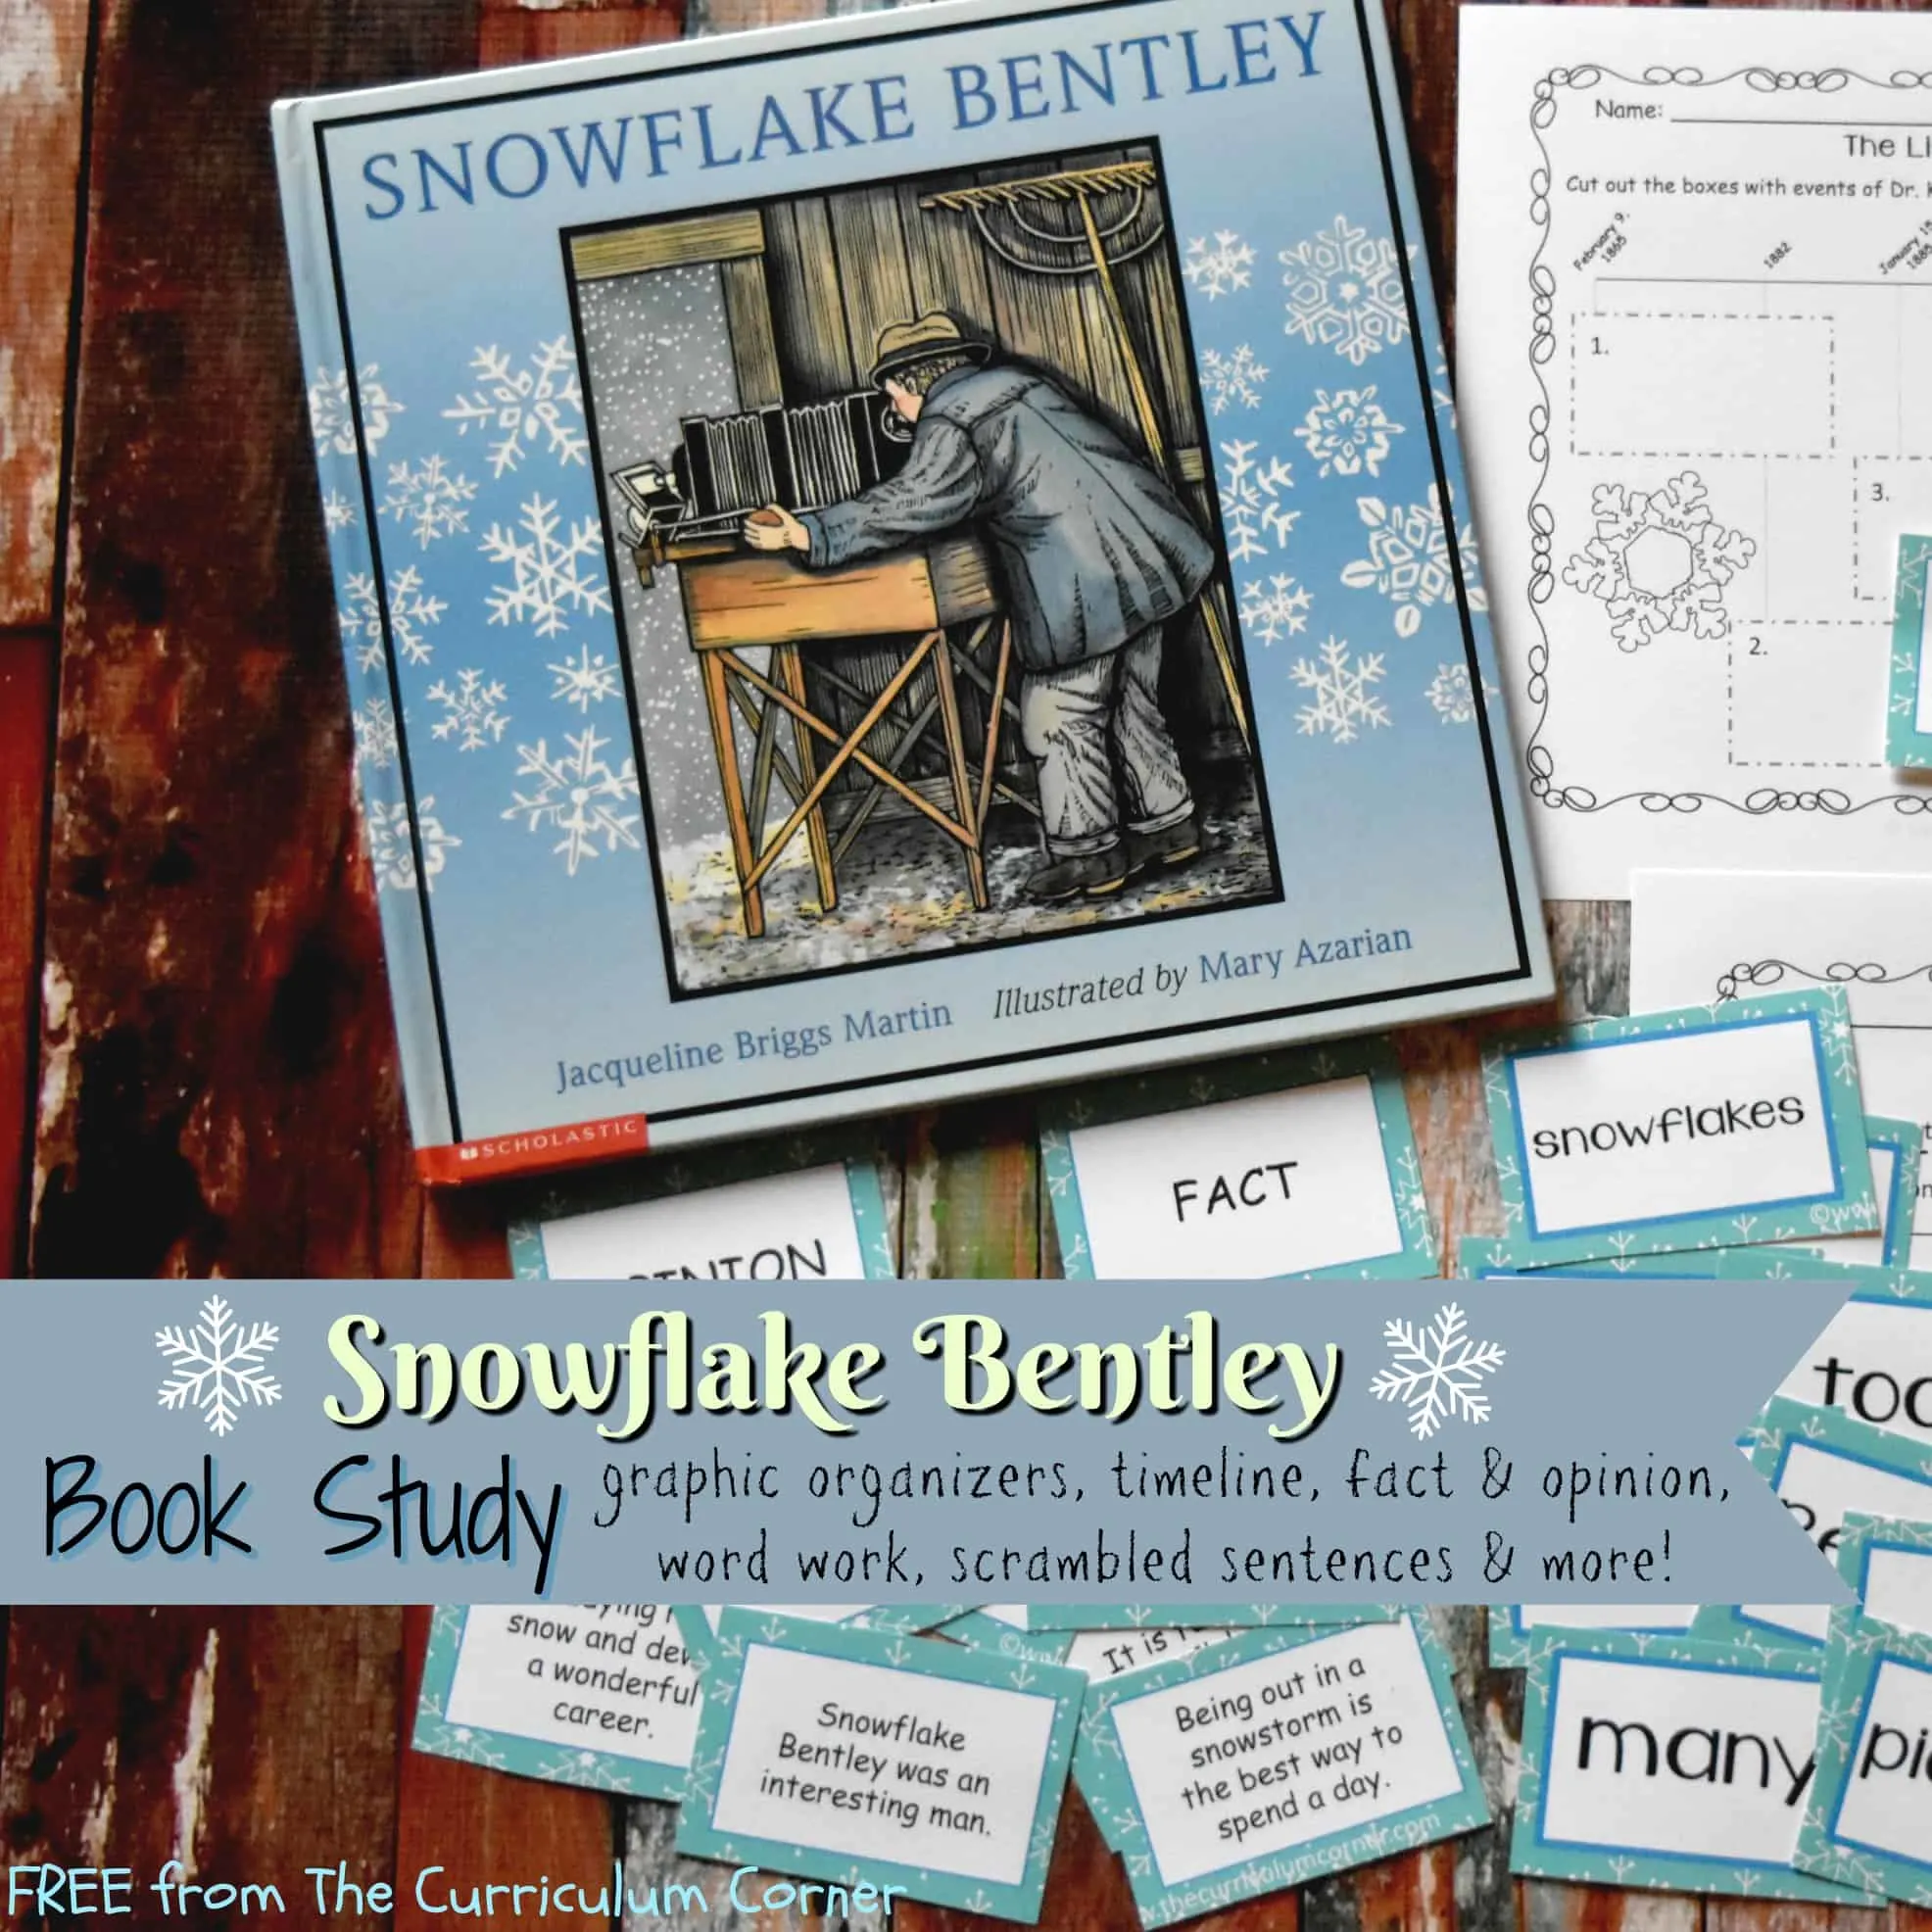 FREE Snowflake Bentley Book Study from The Curriculum Corner